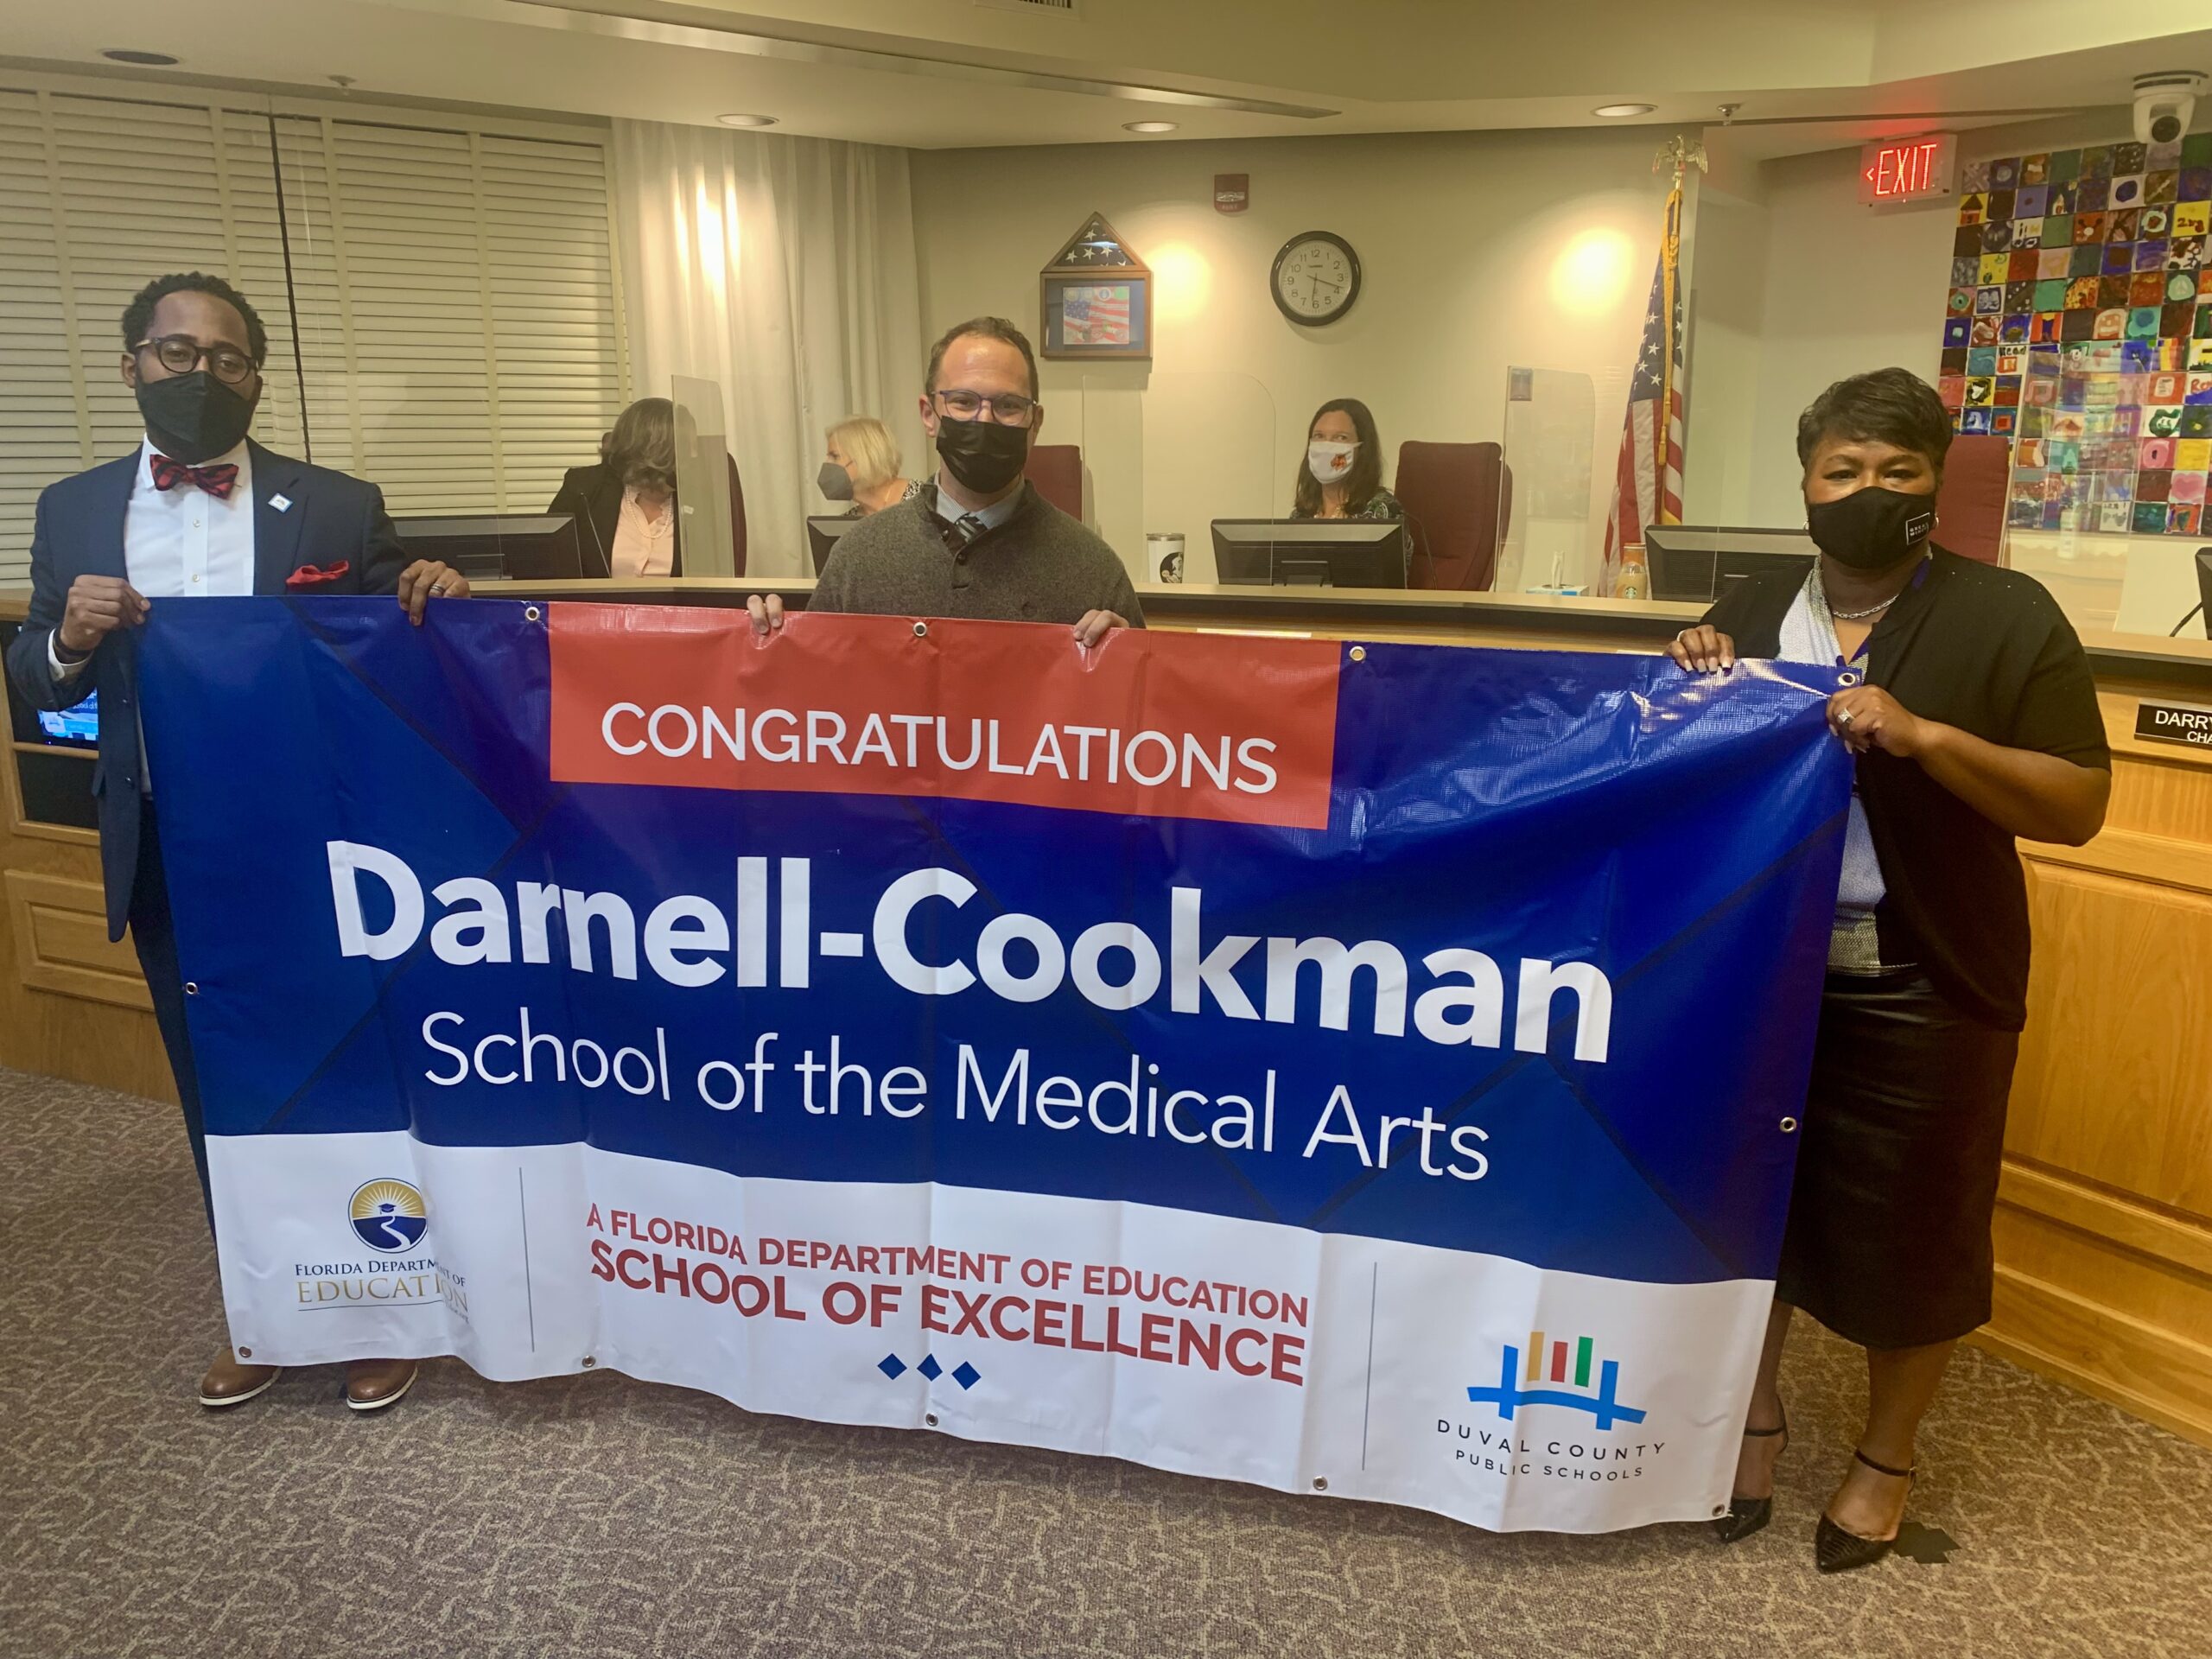 Superintendent, Board Chairman and school administrator hold banner Congratulations Darnell-Cookman School of the Medical Arts a Florida Department of Education School of Excellence